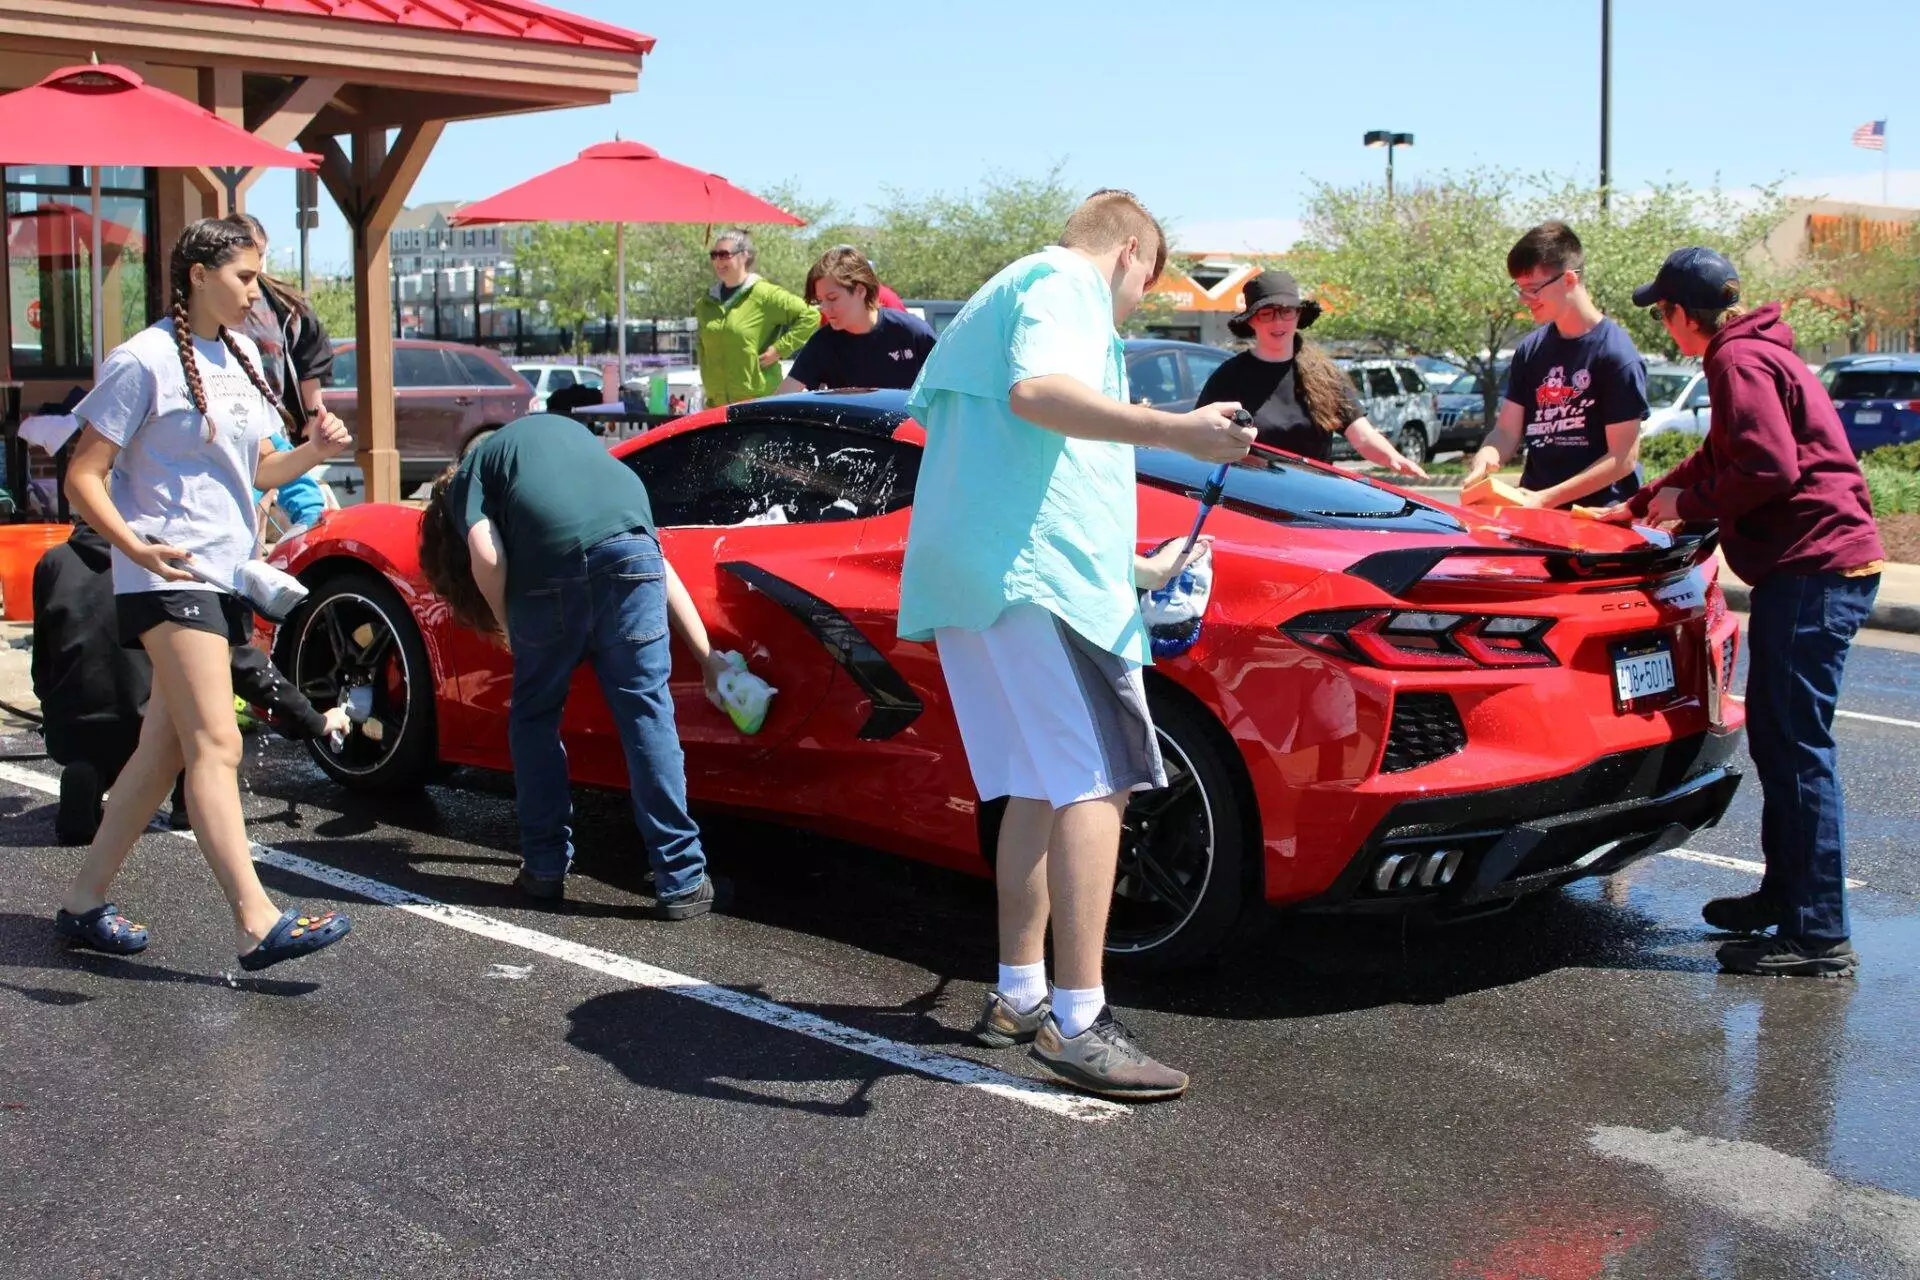 People washing a red sports car in a sunny parking lot, with one person wiping the hood and others cleaning various parts of the car.